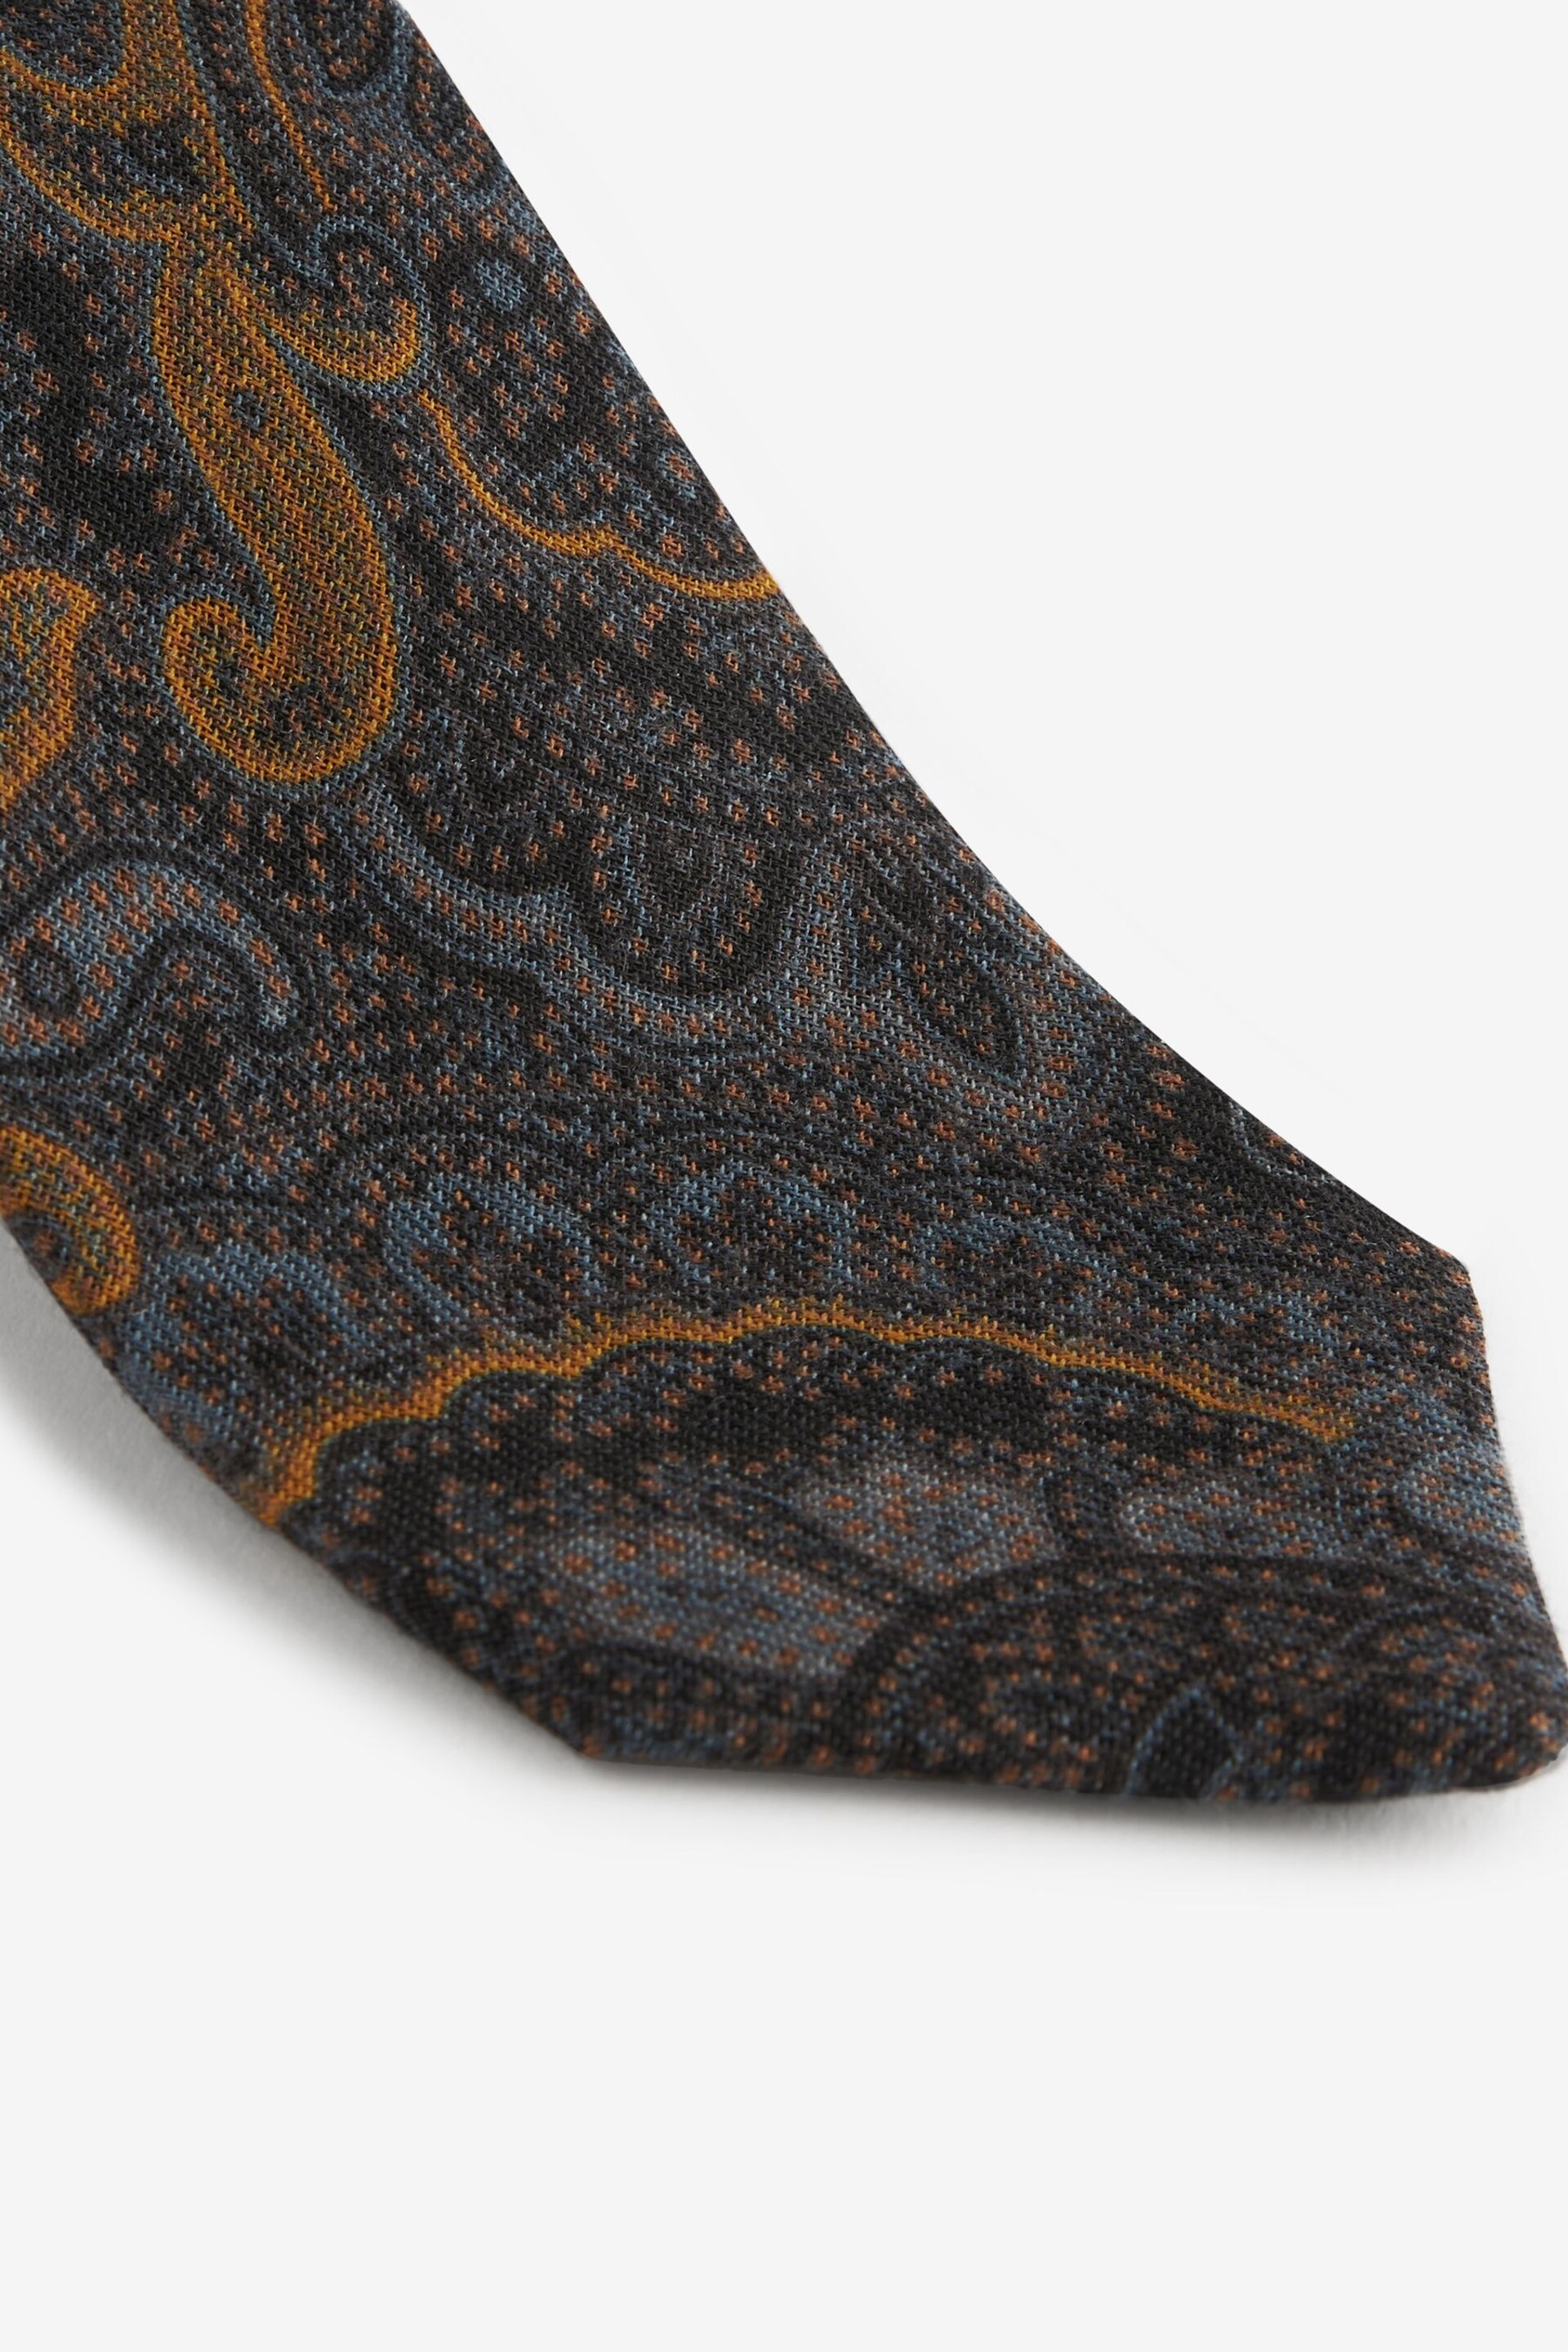 Grey Paisley Signature Made In Italy Silk Wool Blend Tie - Image 2 of 3